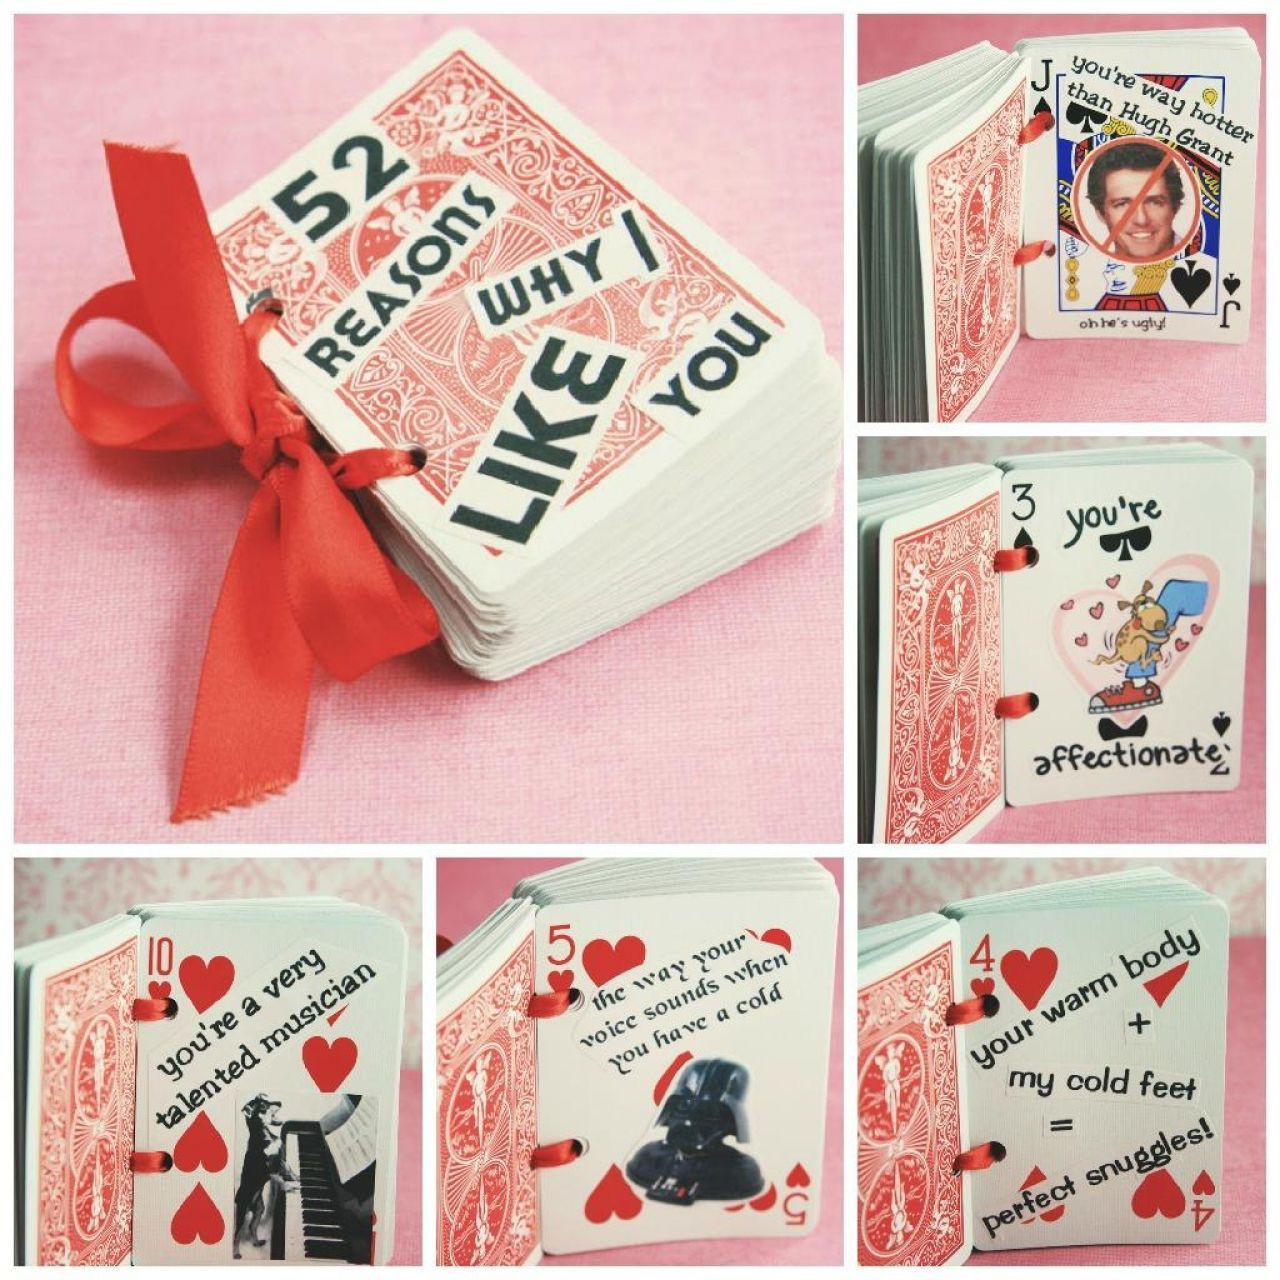 Creative Valentines Day Gifts For Boyfriend
 17 Last Minute Handmade Valentine Gifts for Him Surprise